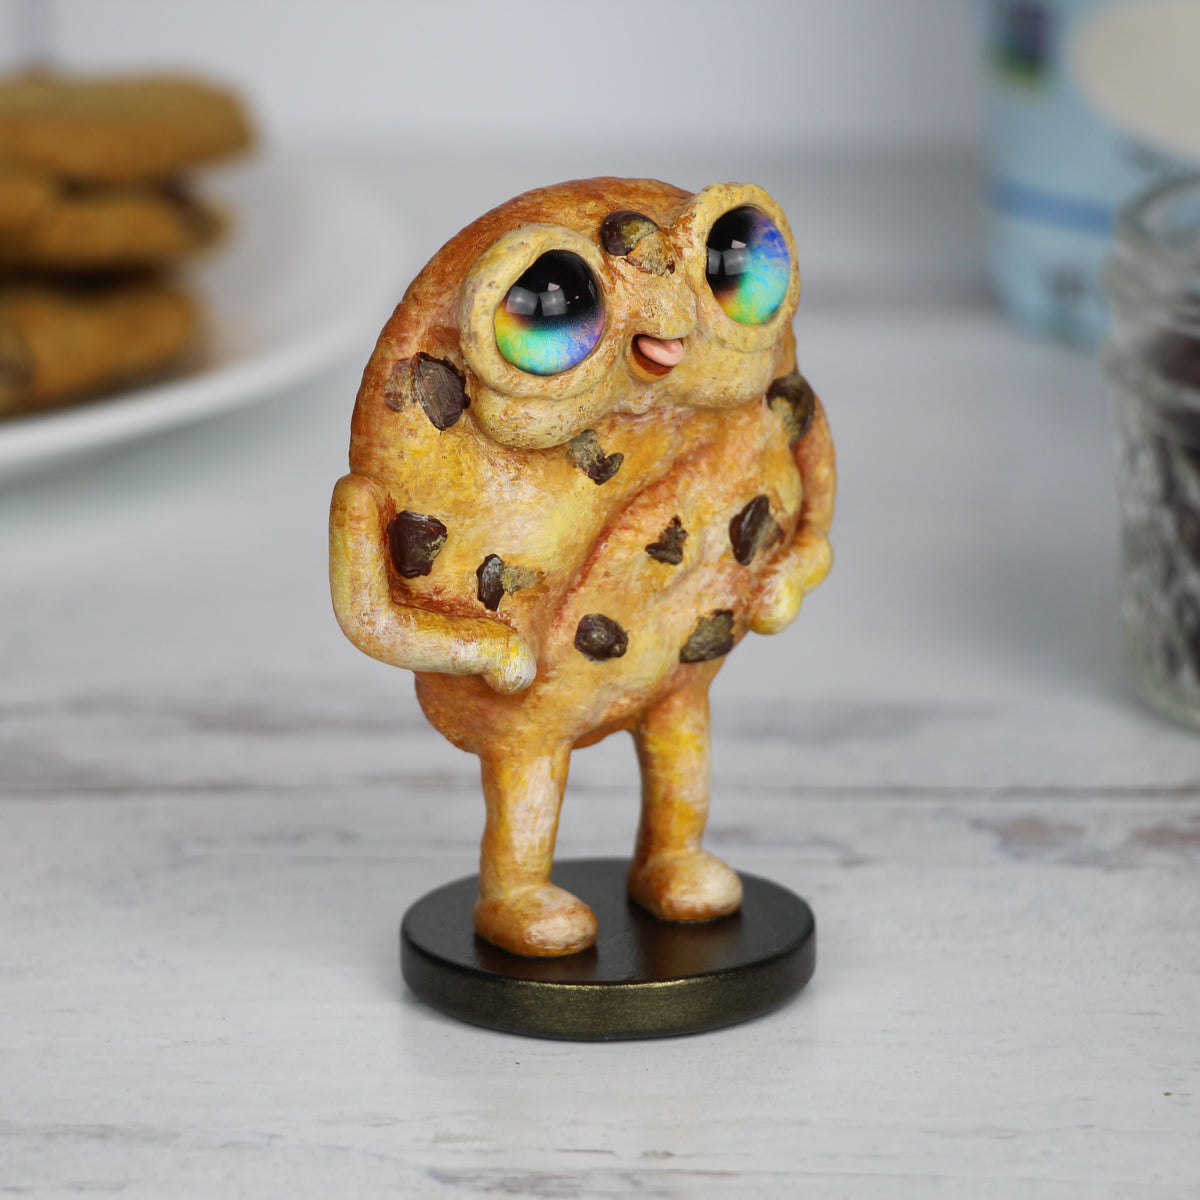 Crumbles the Enchanted Cookie